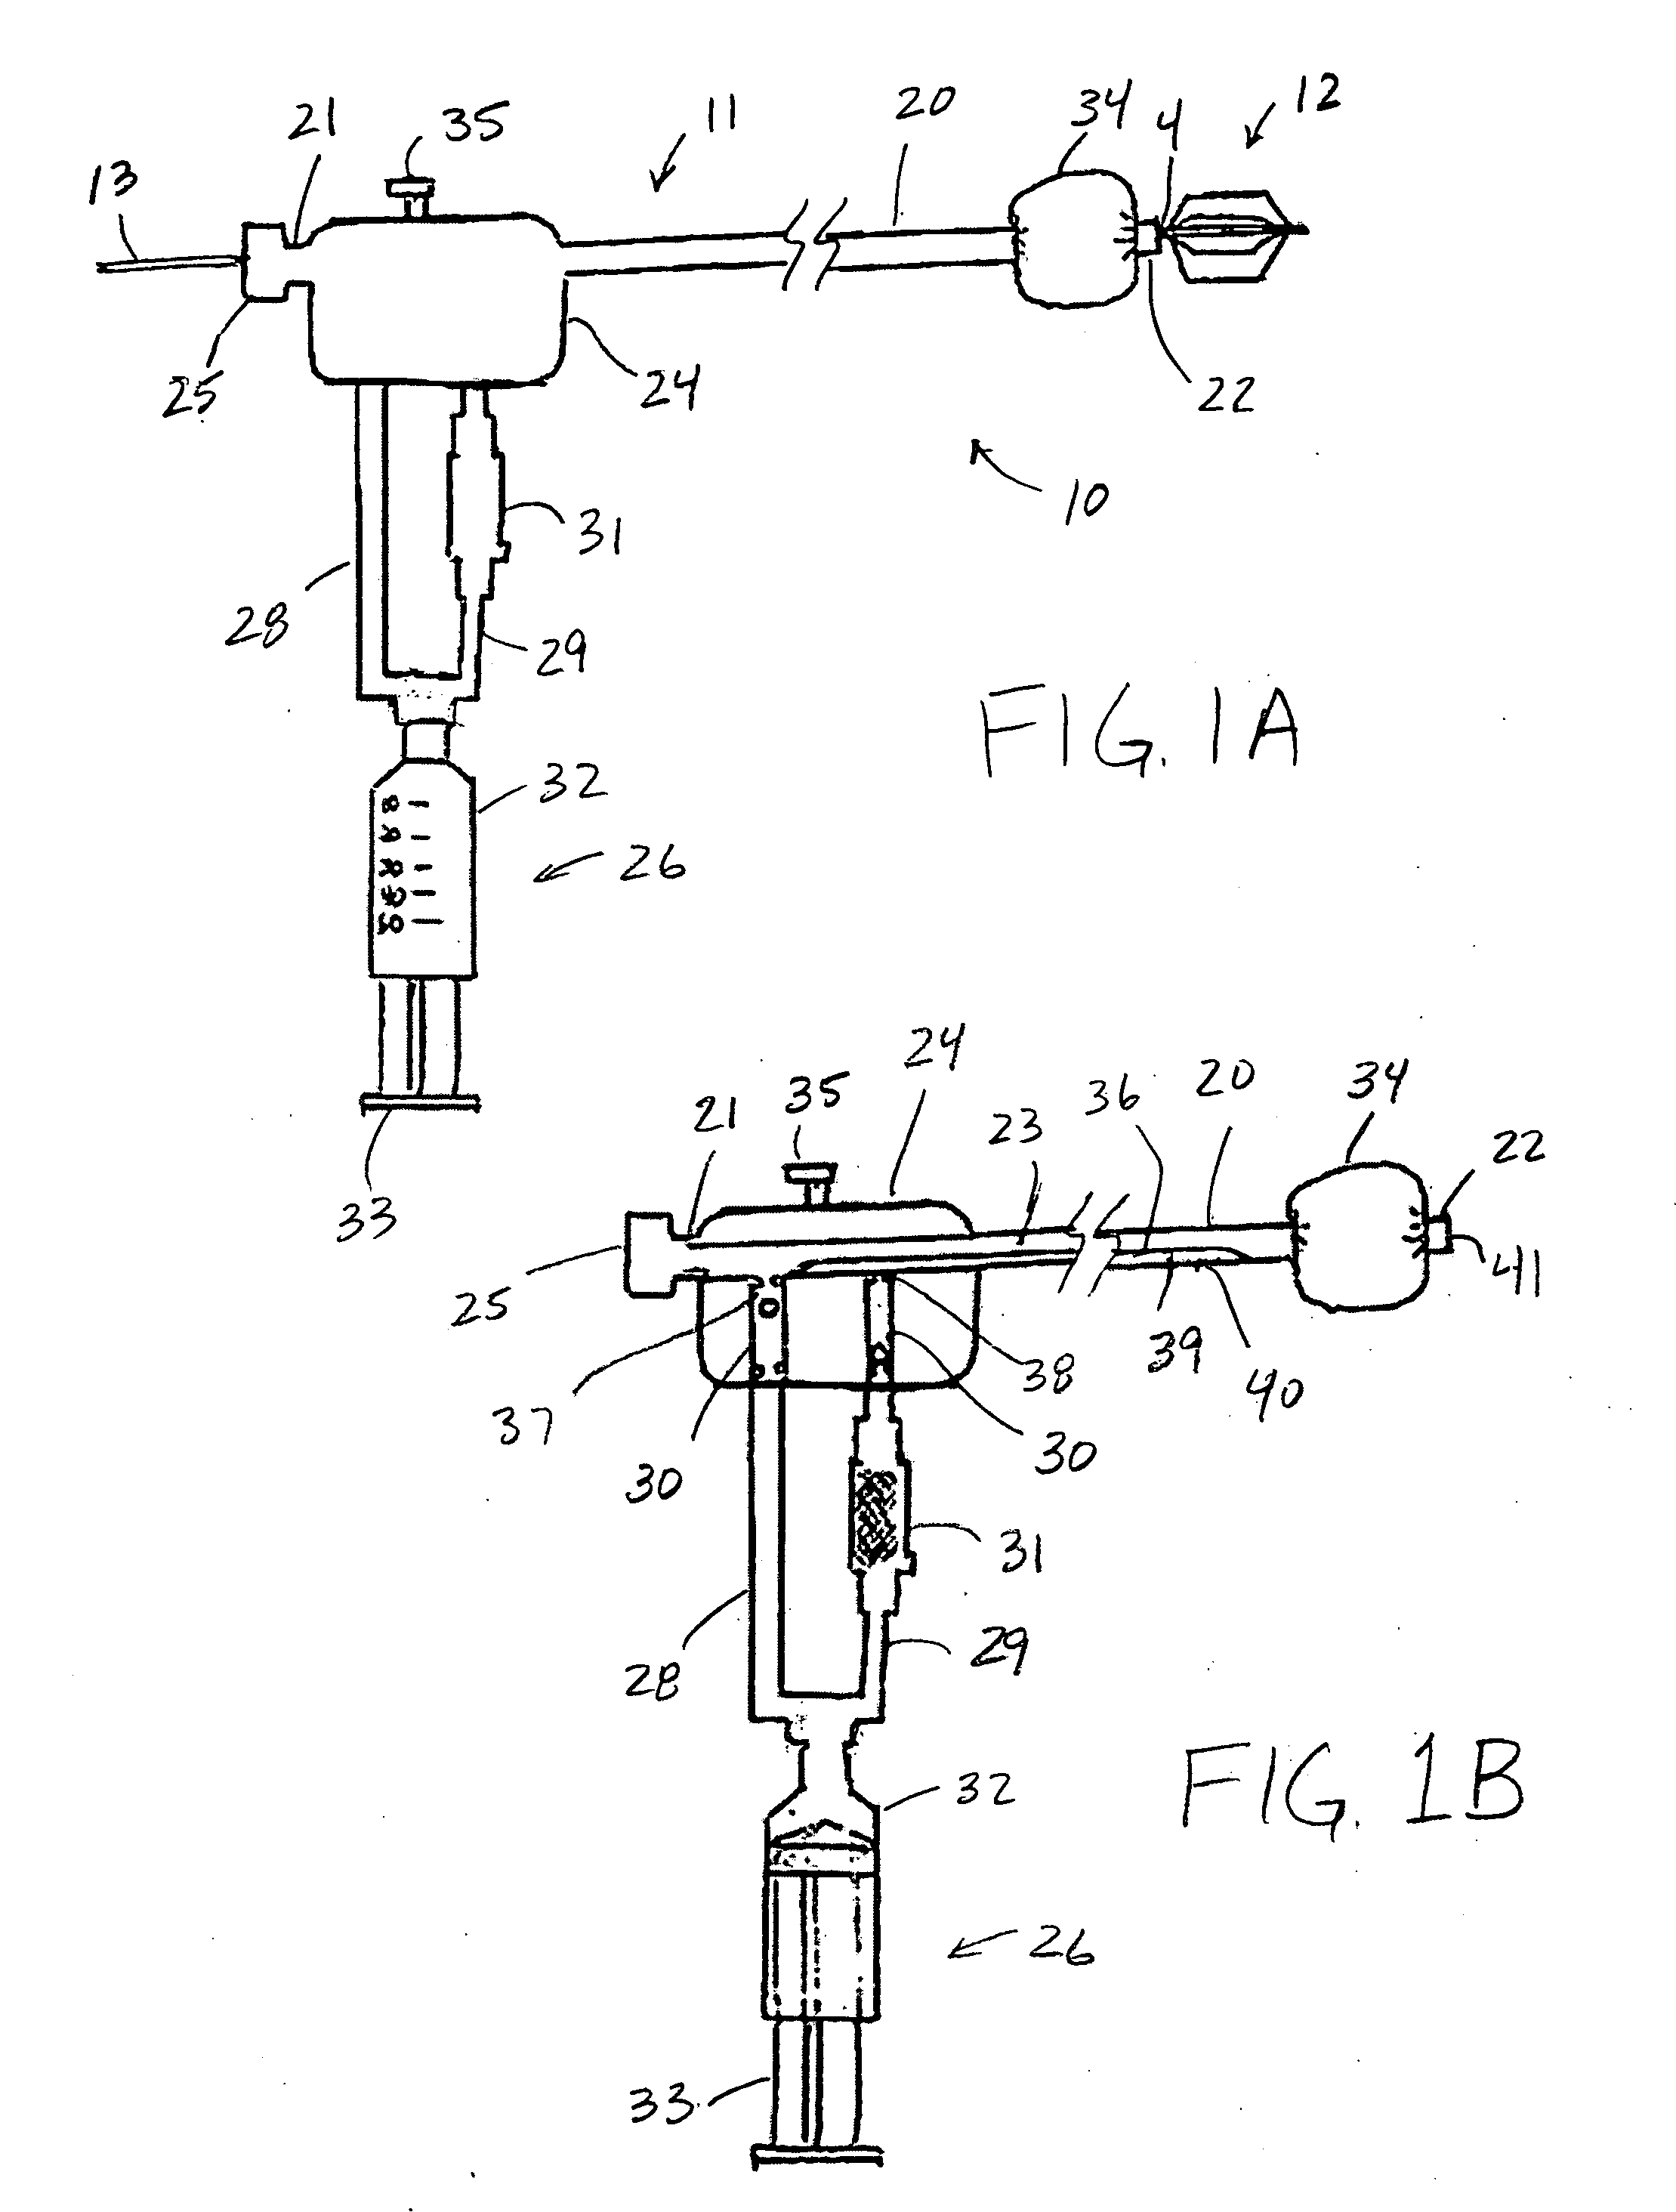 Embolic protection and plaque removal system with closed circuit aspiration and filtering